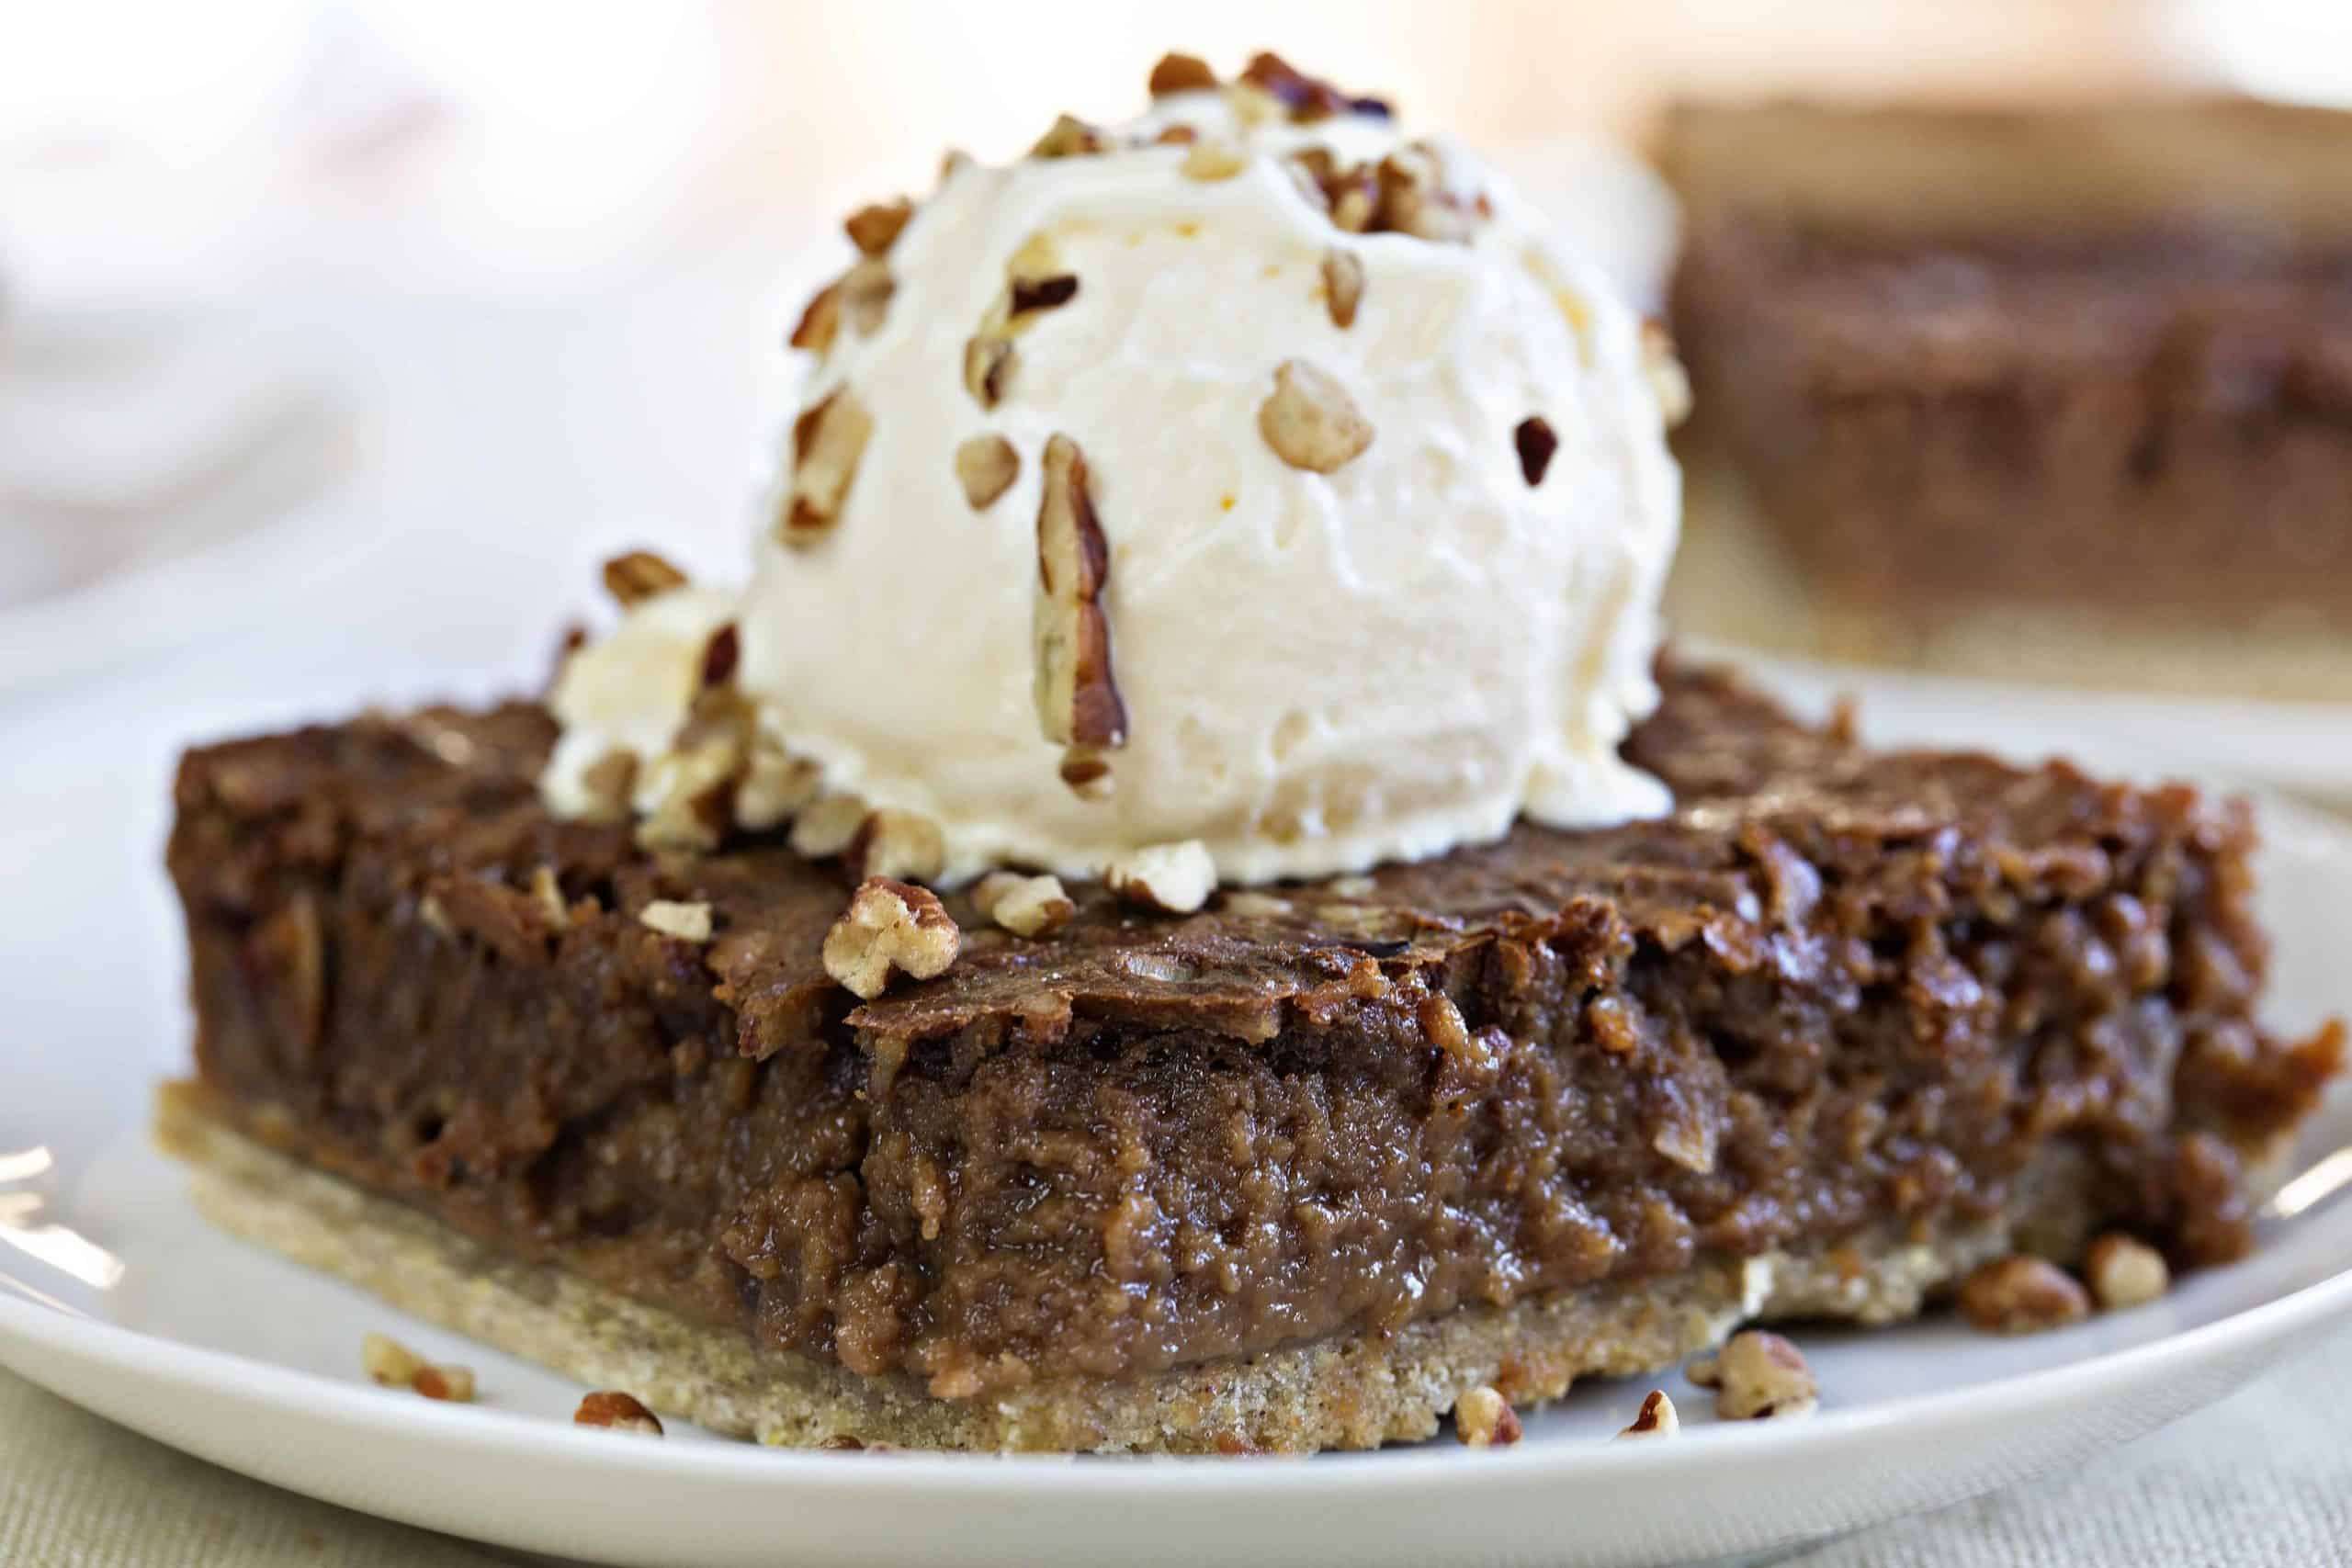 One Piece of German Chocolate Pie with Ice Cream on Top